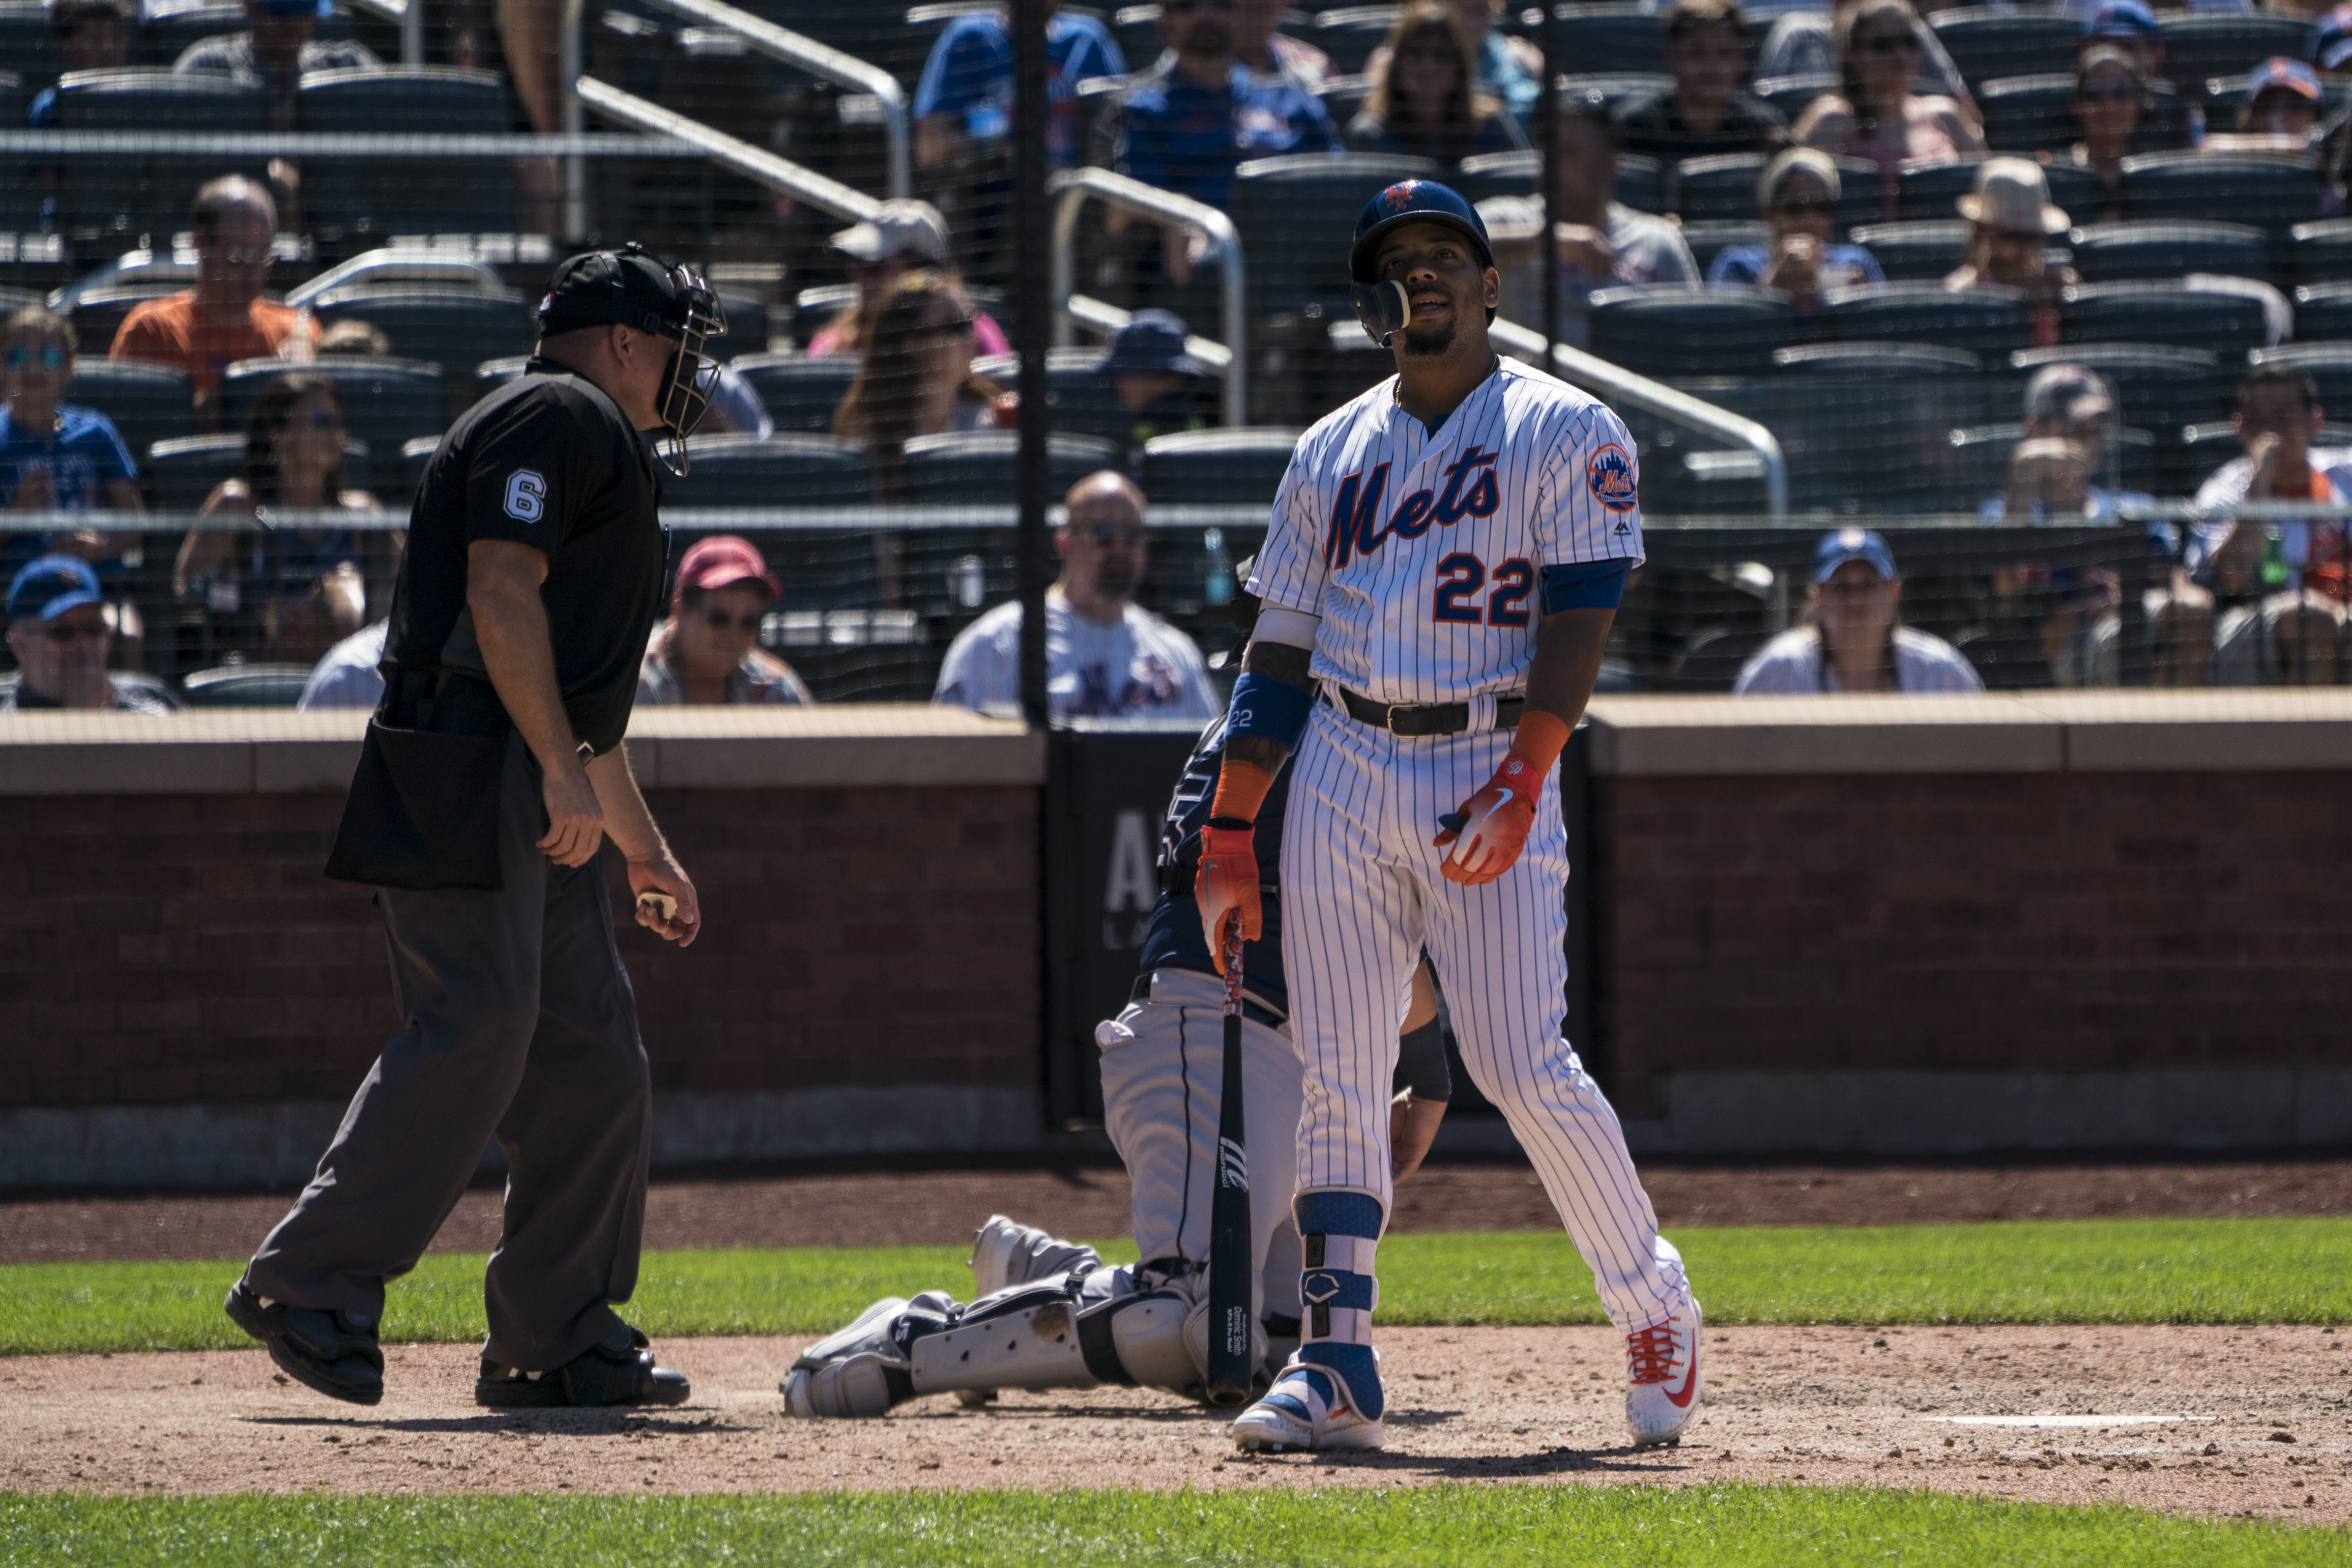 Report: New York Mets Considering Demotion For Dominic Smith